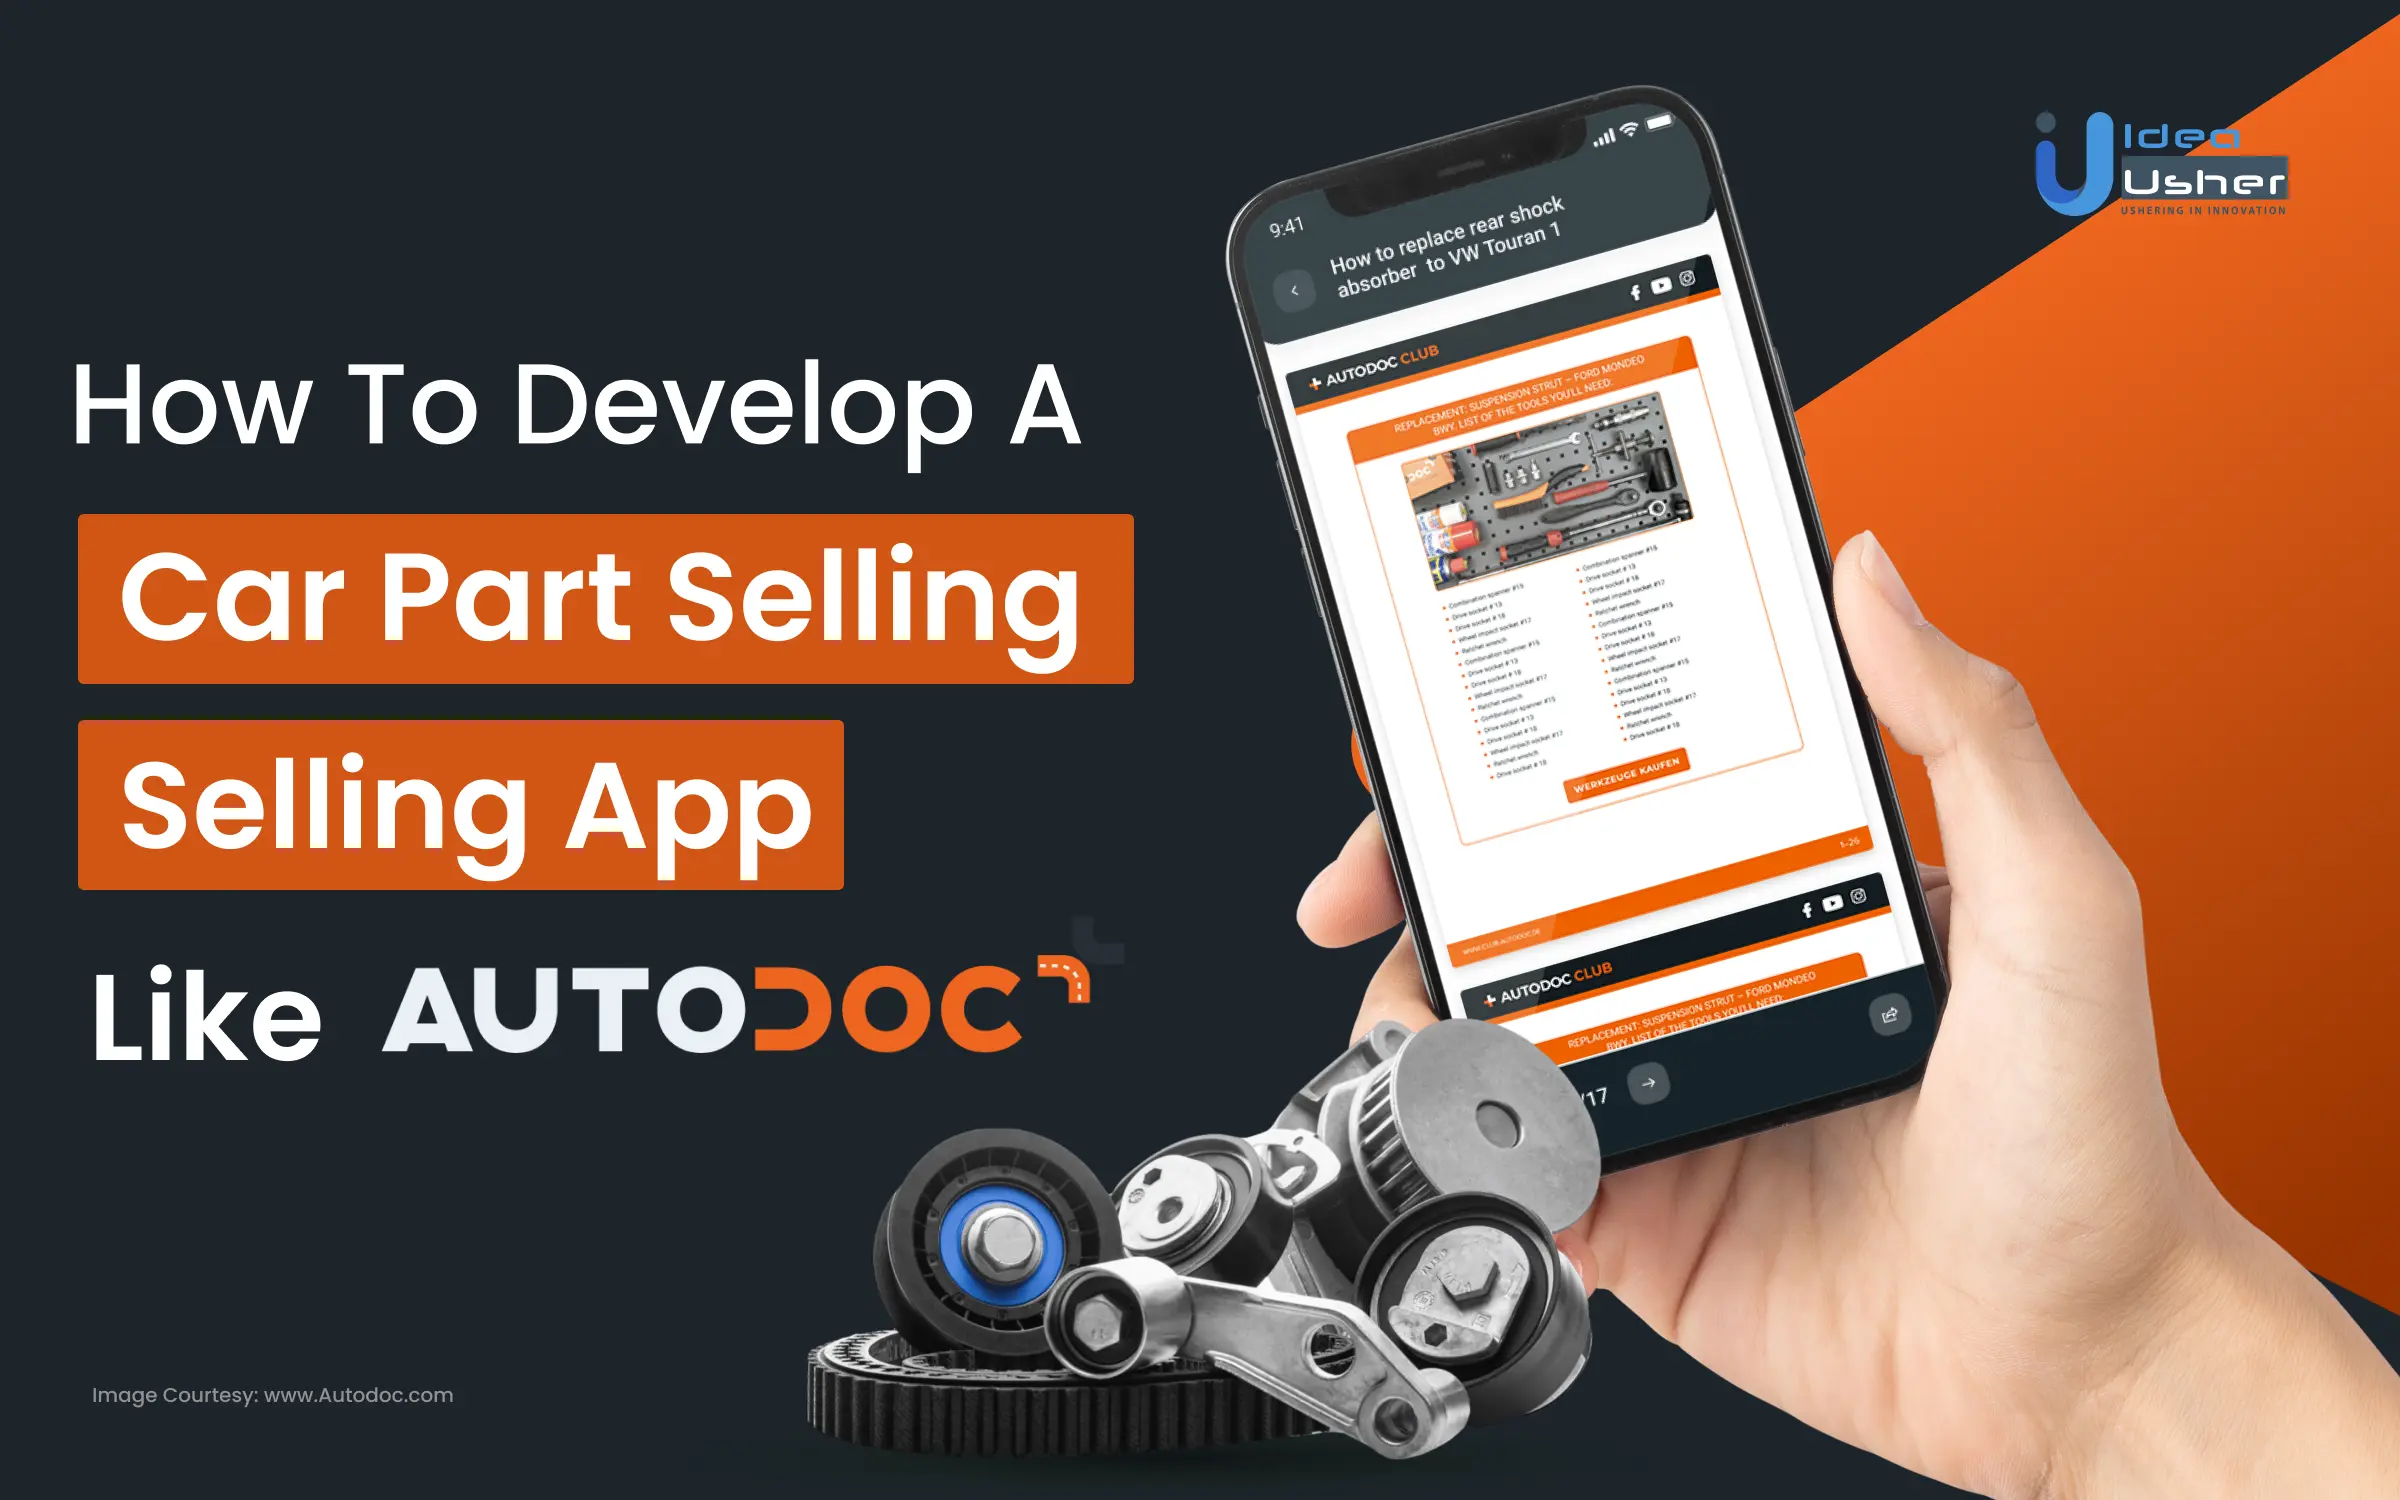 How To Develop A Car Part Selling App Like Autodoc_